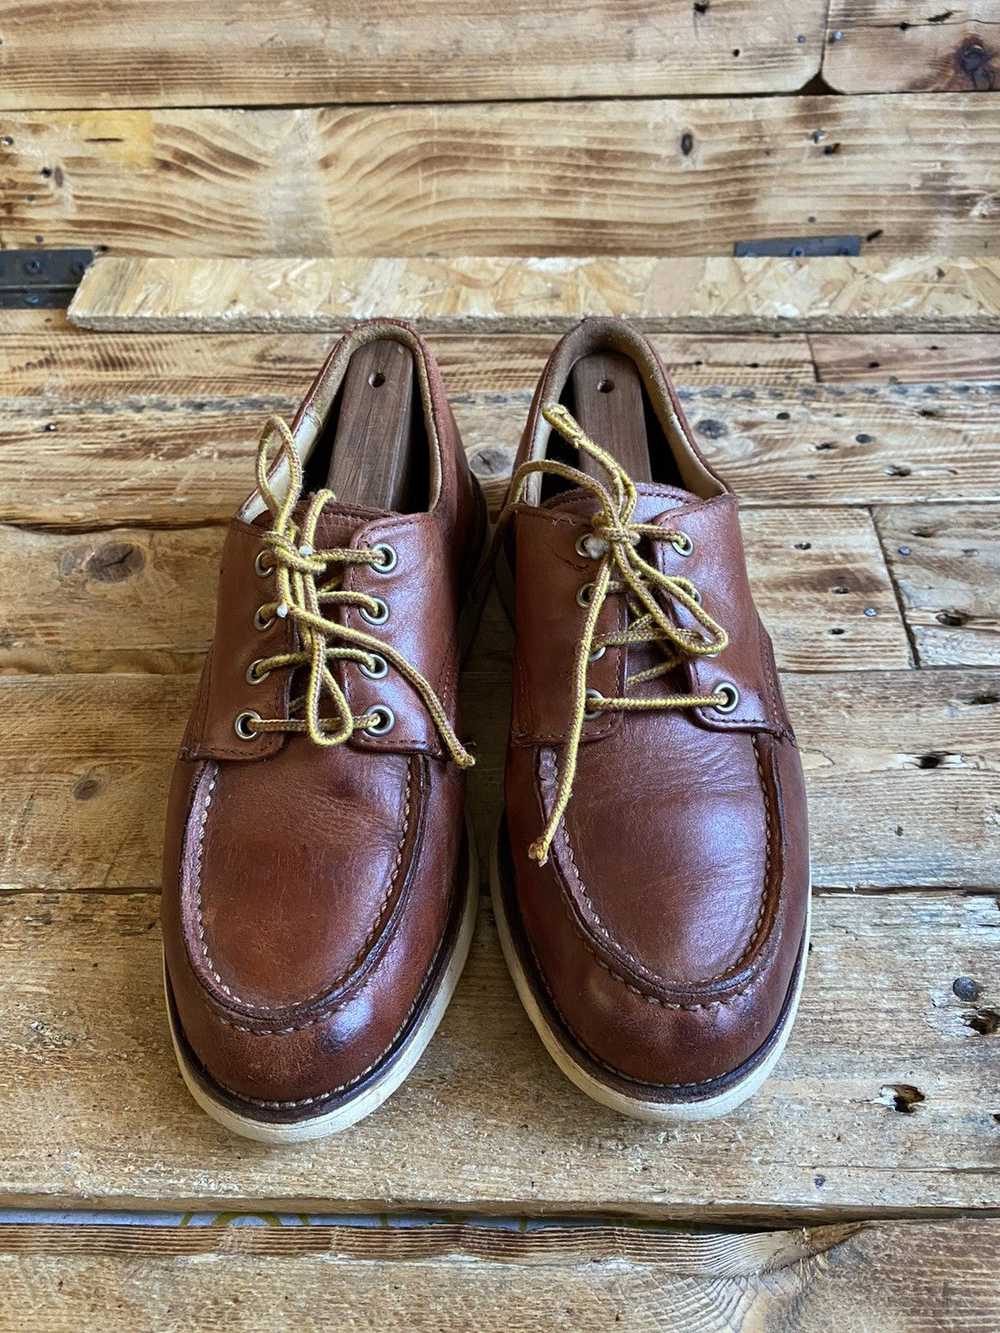 Red Wing Redwing oxford ,style 3112 sz US8.5 - image 2